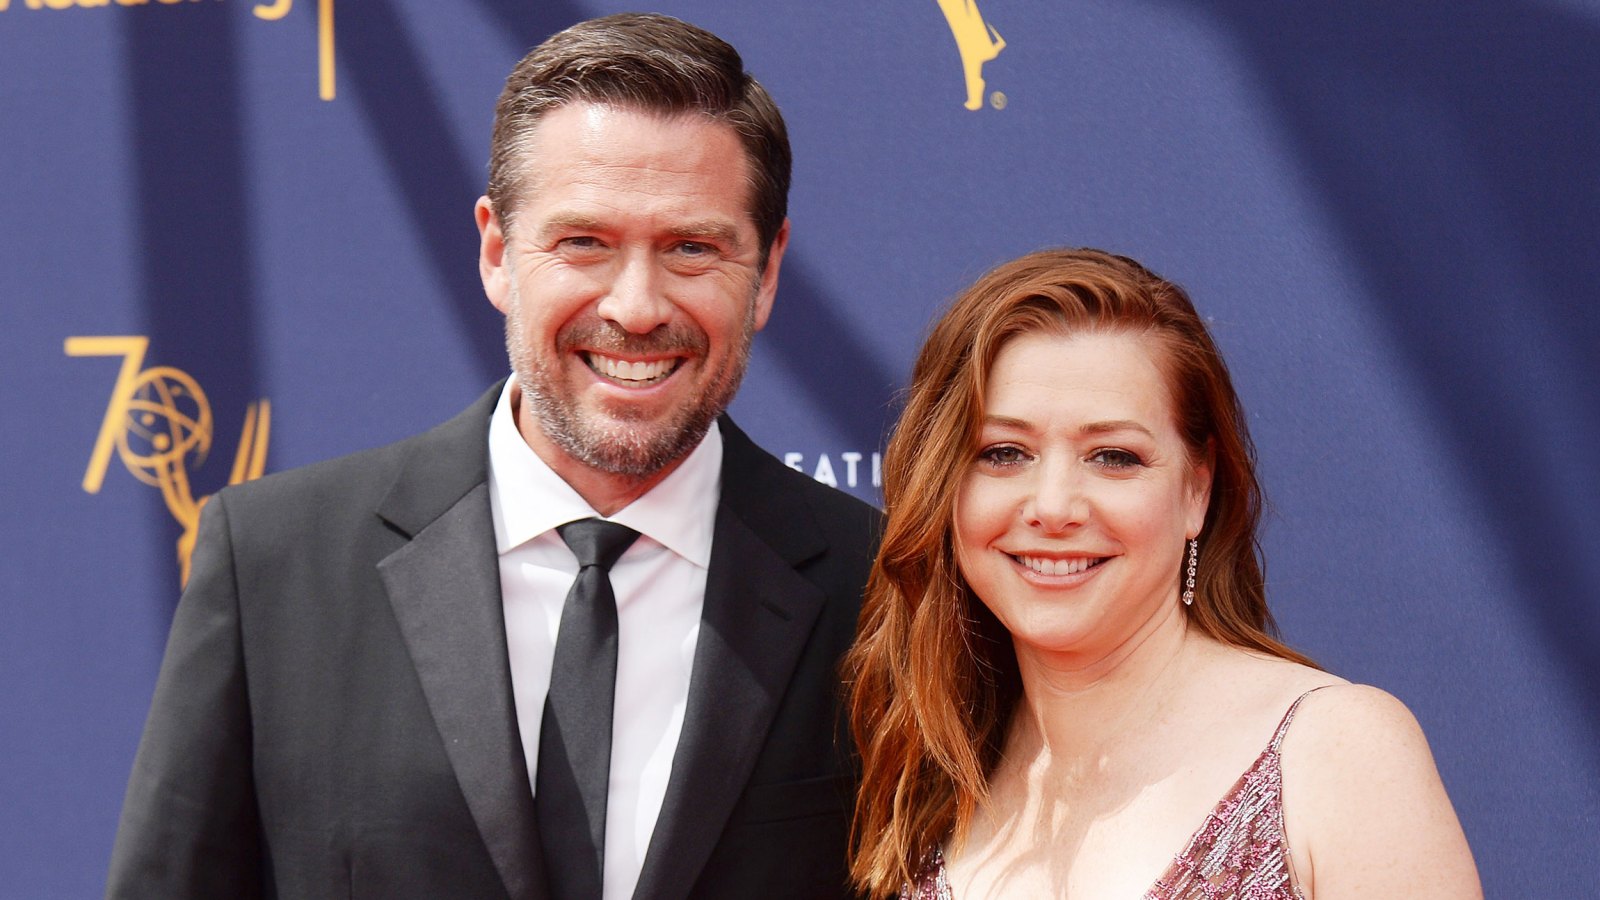 Alyson Hannigan Admits Husband Alexis Denisof Is a Better Cook Than Her